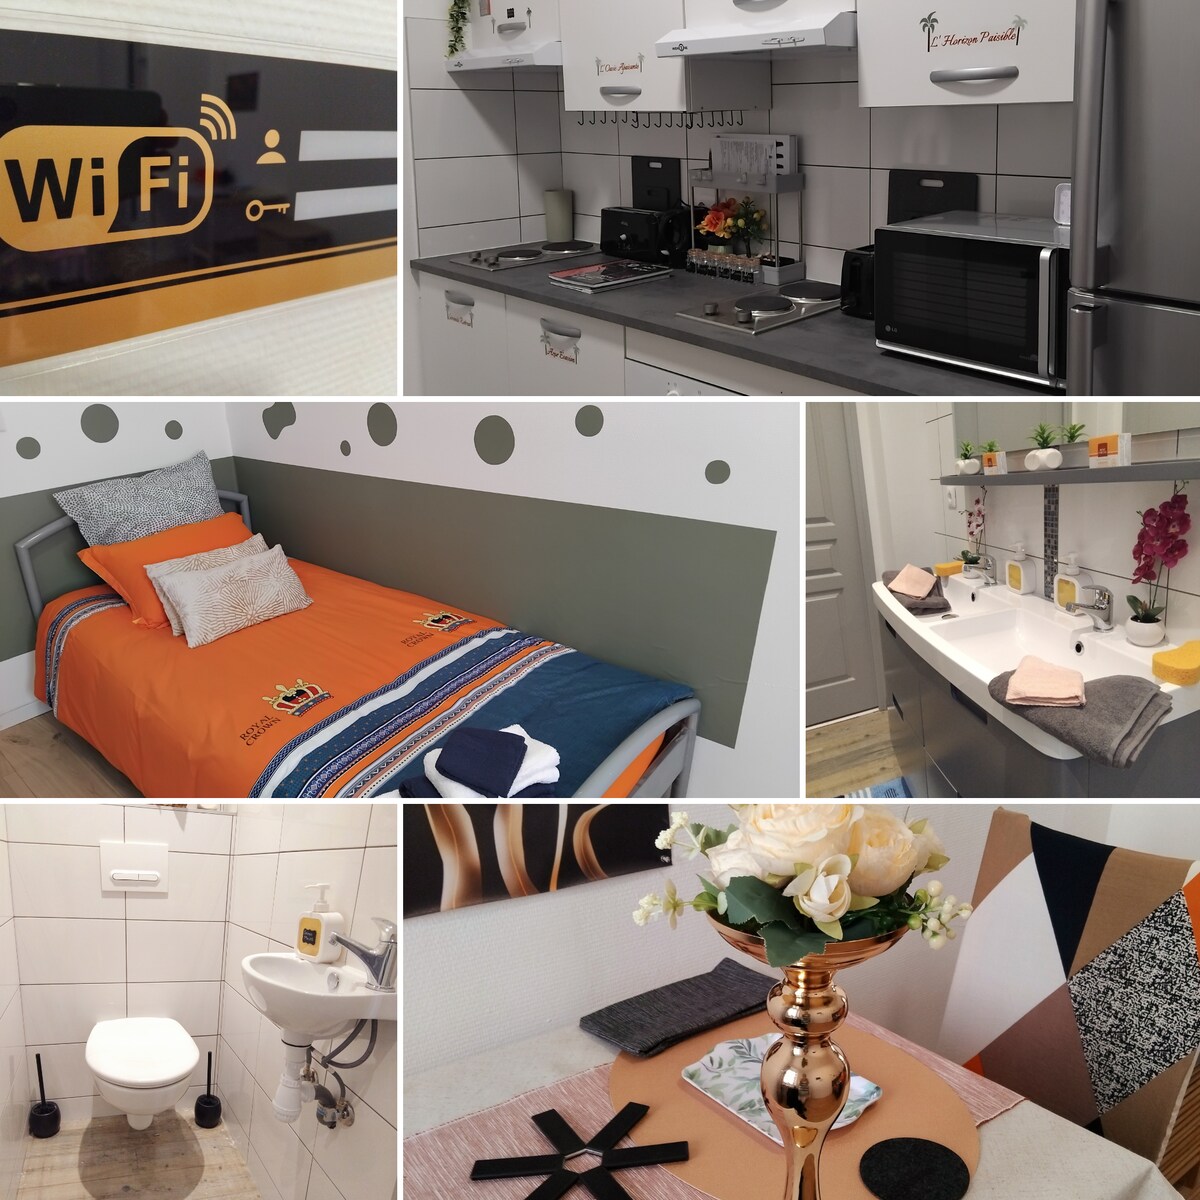 StaybyTS-HorizonPaisible-Wifi -Netflix-CentreVille